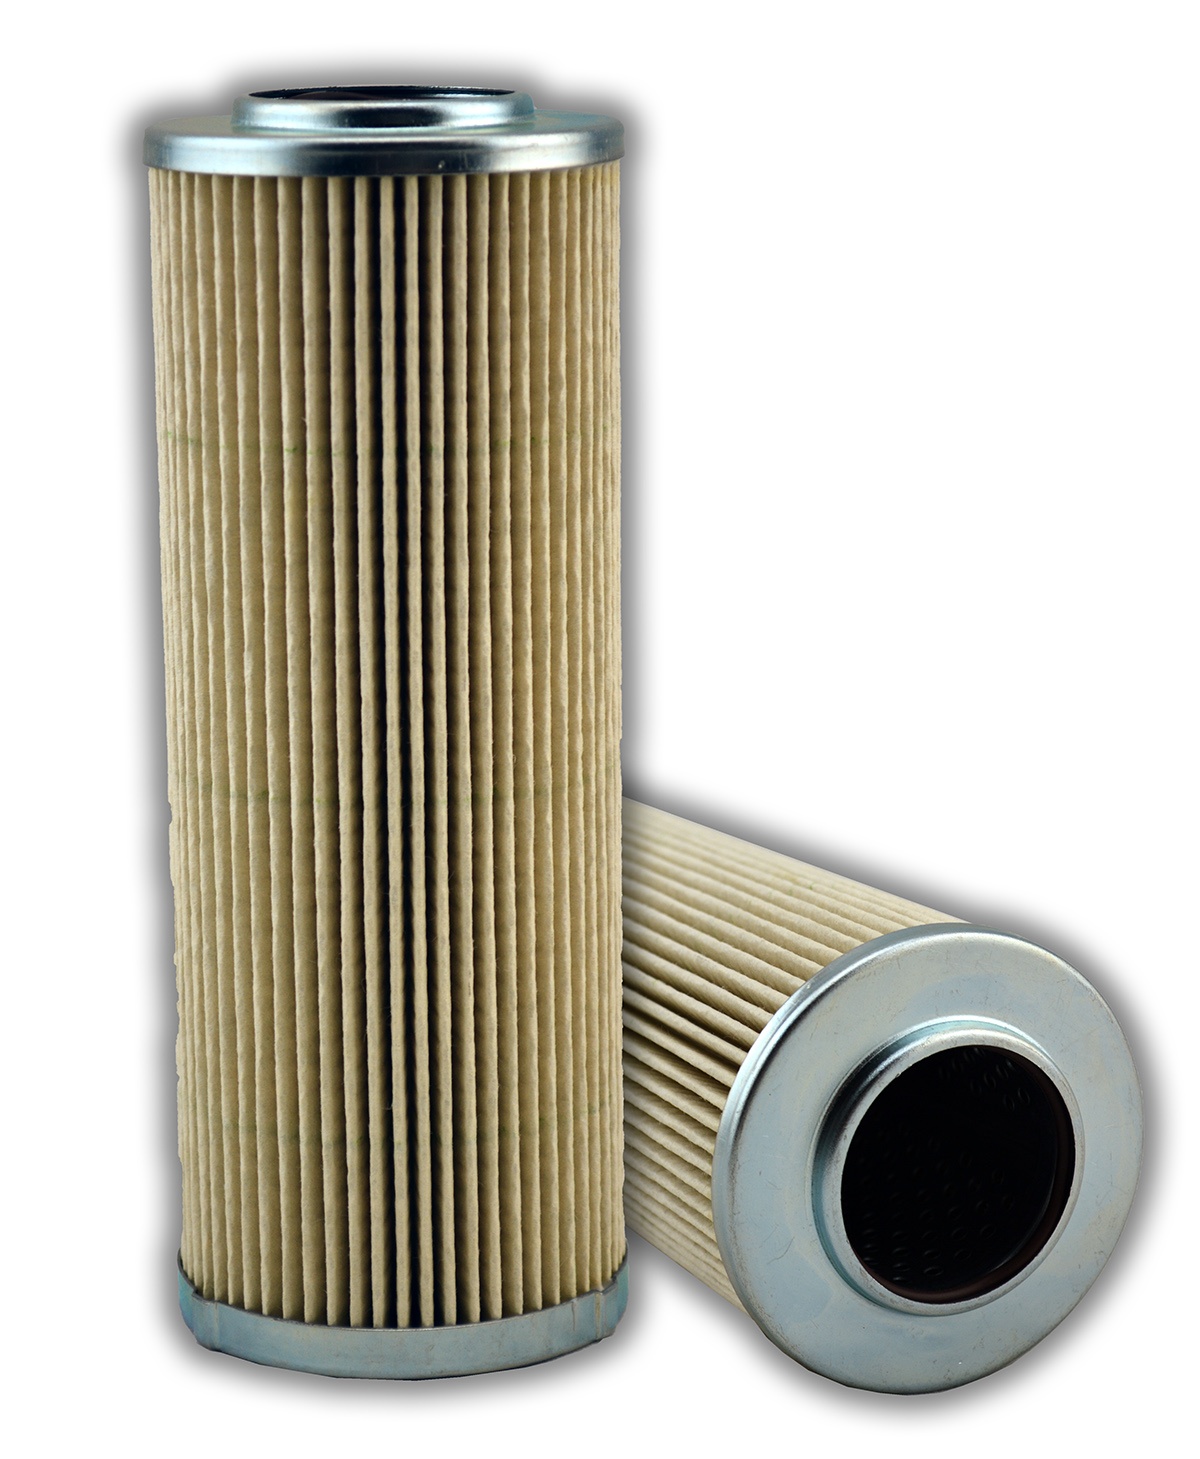 Interchange Hydraulic Filter, Cellulose, 10 Micron Rating, Viton Seal, 8.22 Inch Height